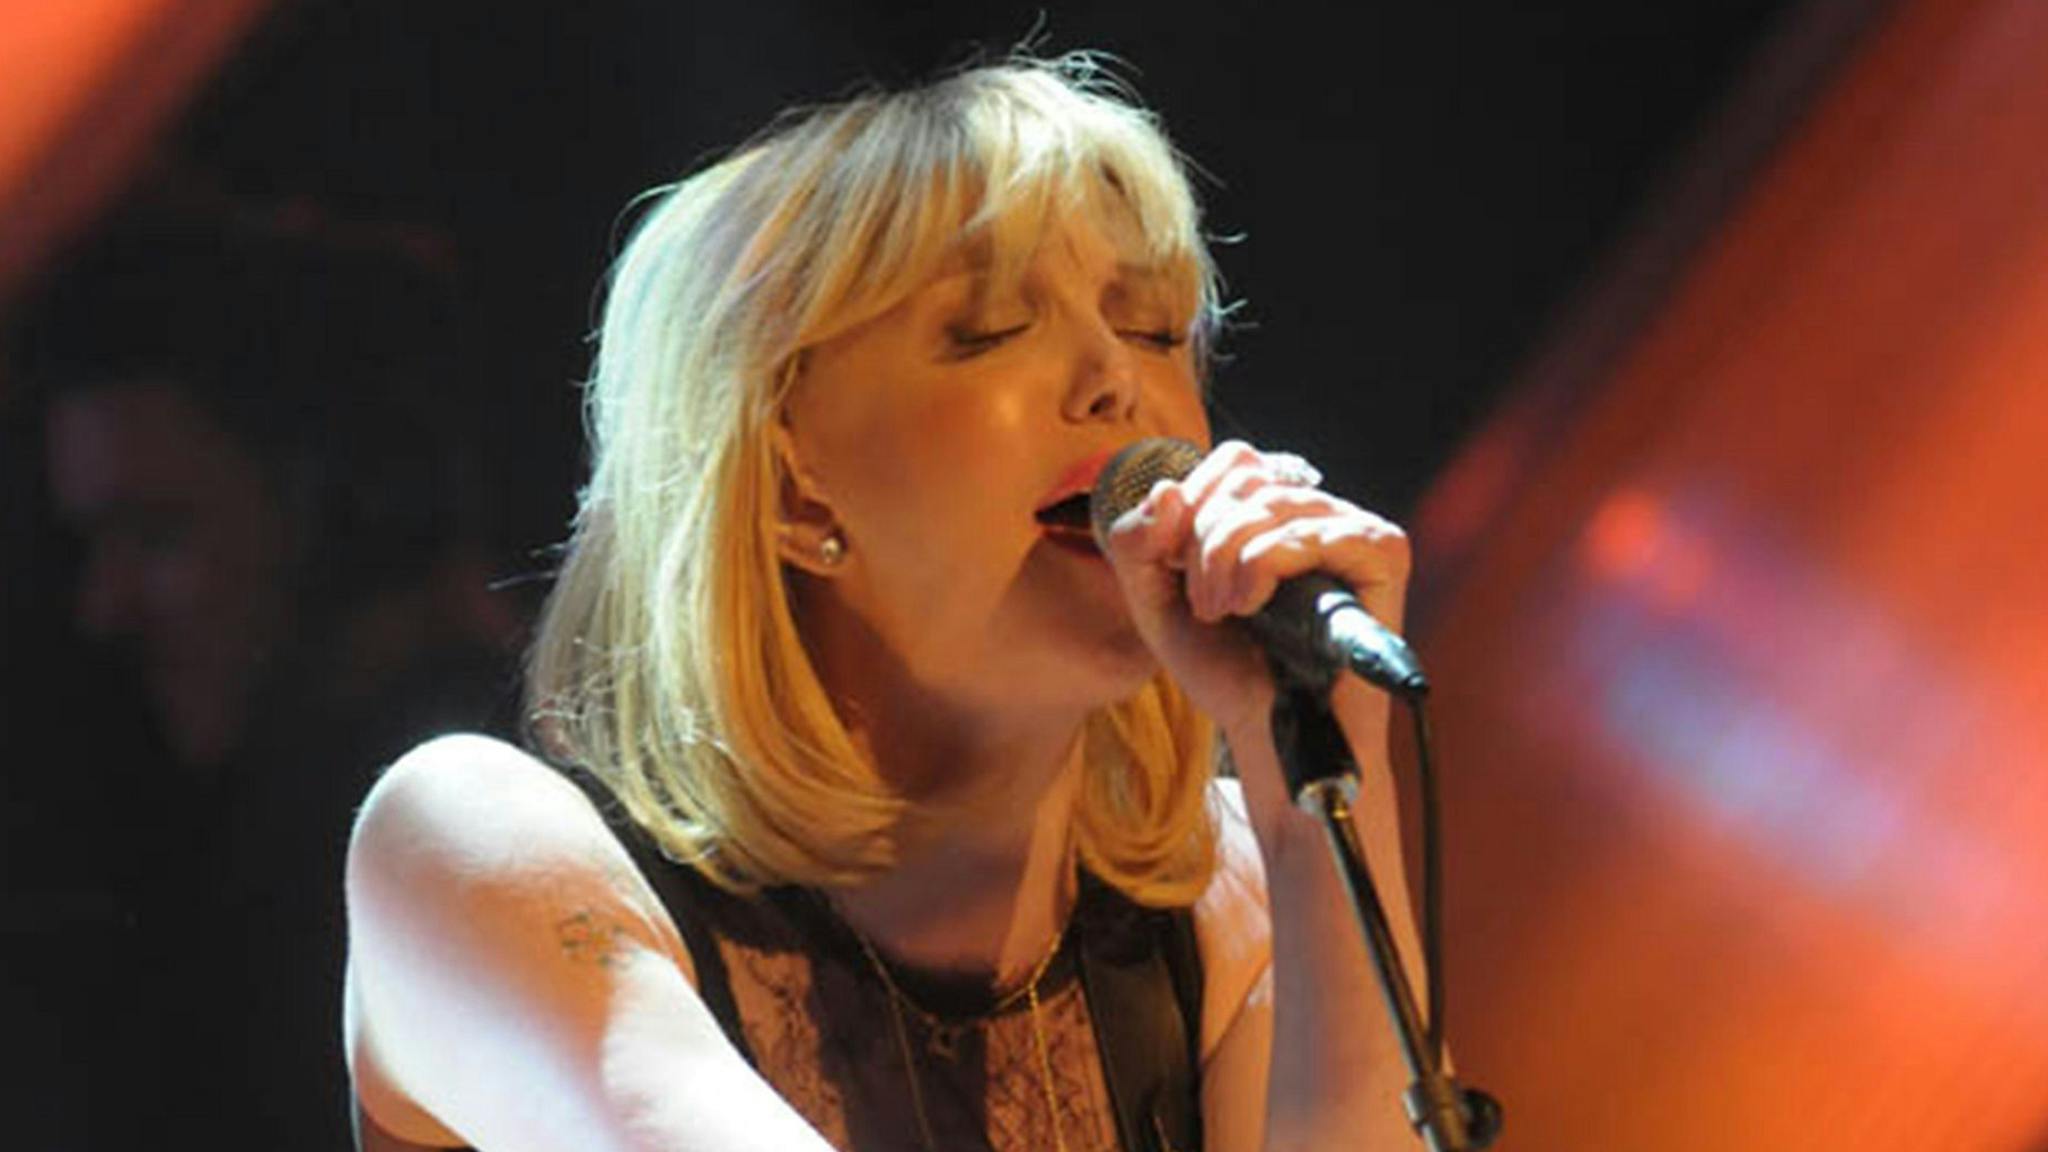 Courtney Love has a radio series coming to the BBC